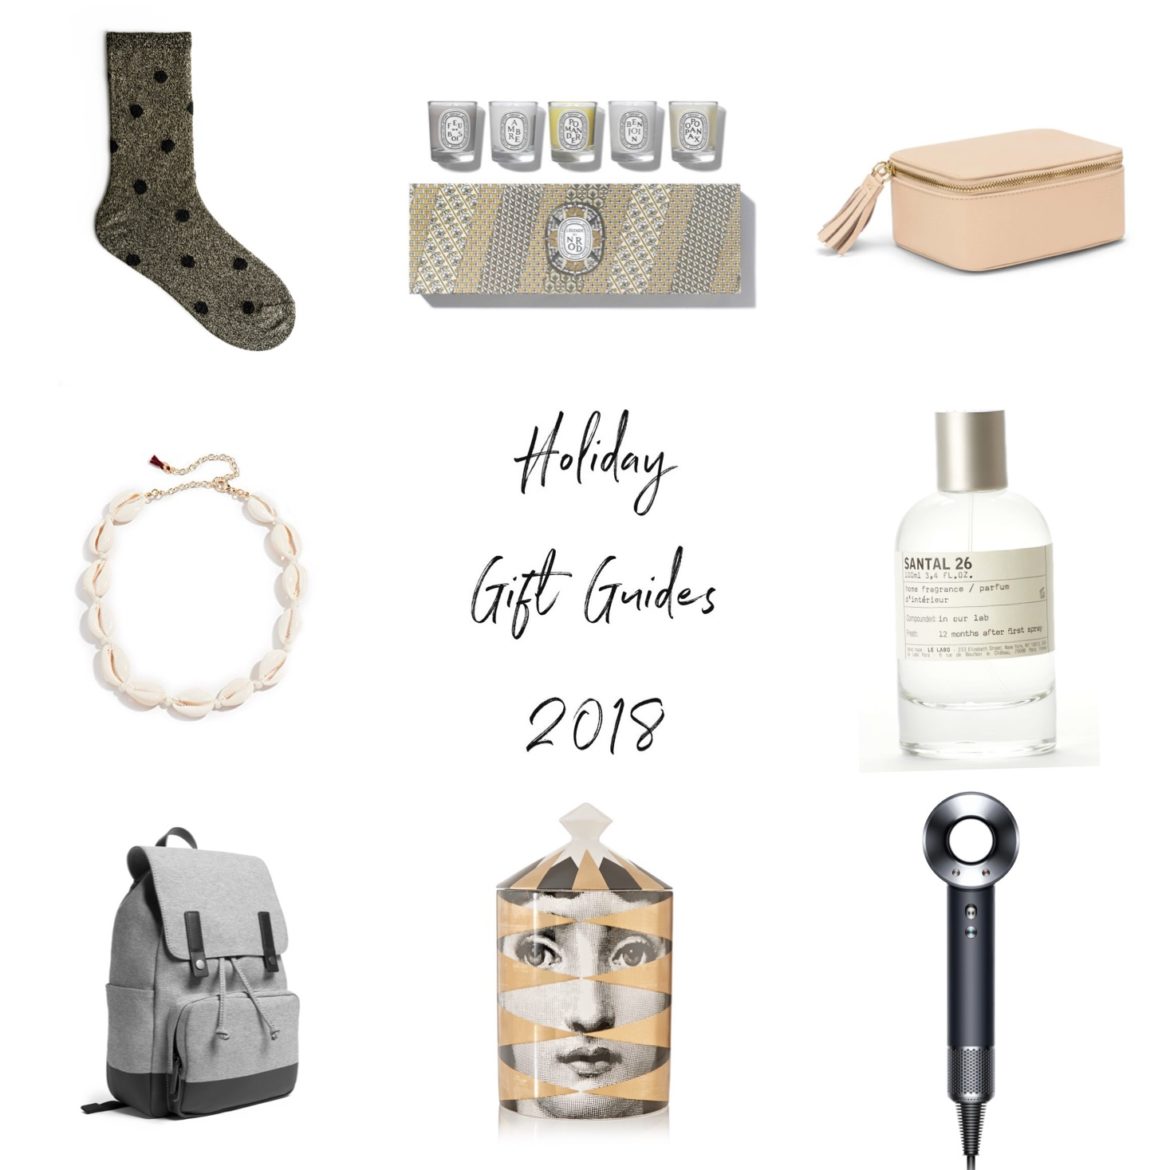 Valentines day gift guides for women 2018, for men, beauty gift guide, jewelry gift guide under $80